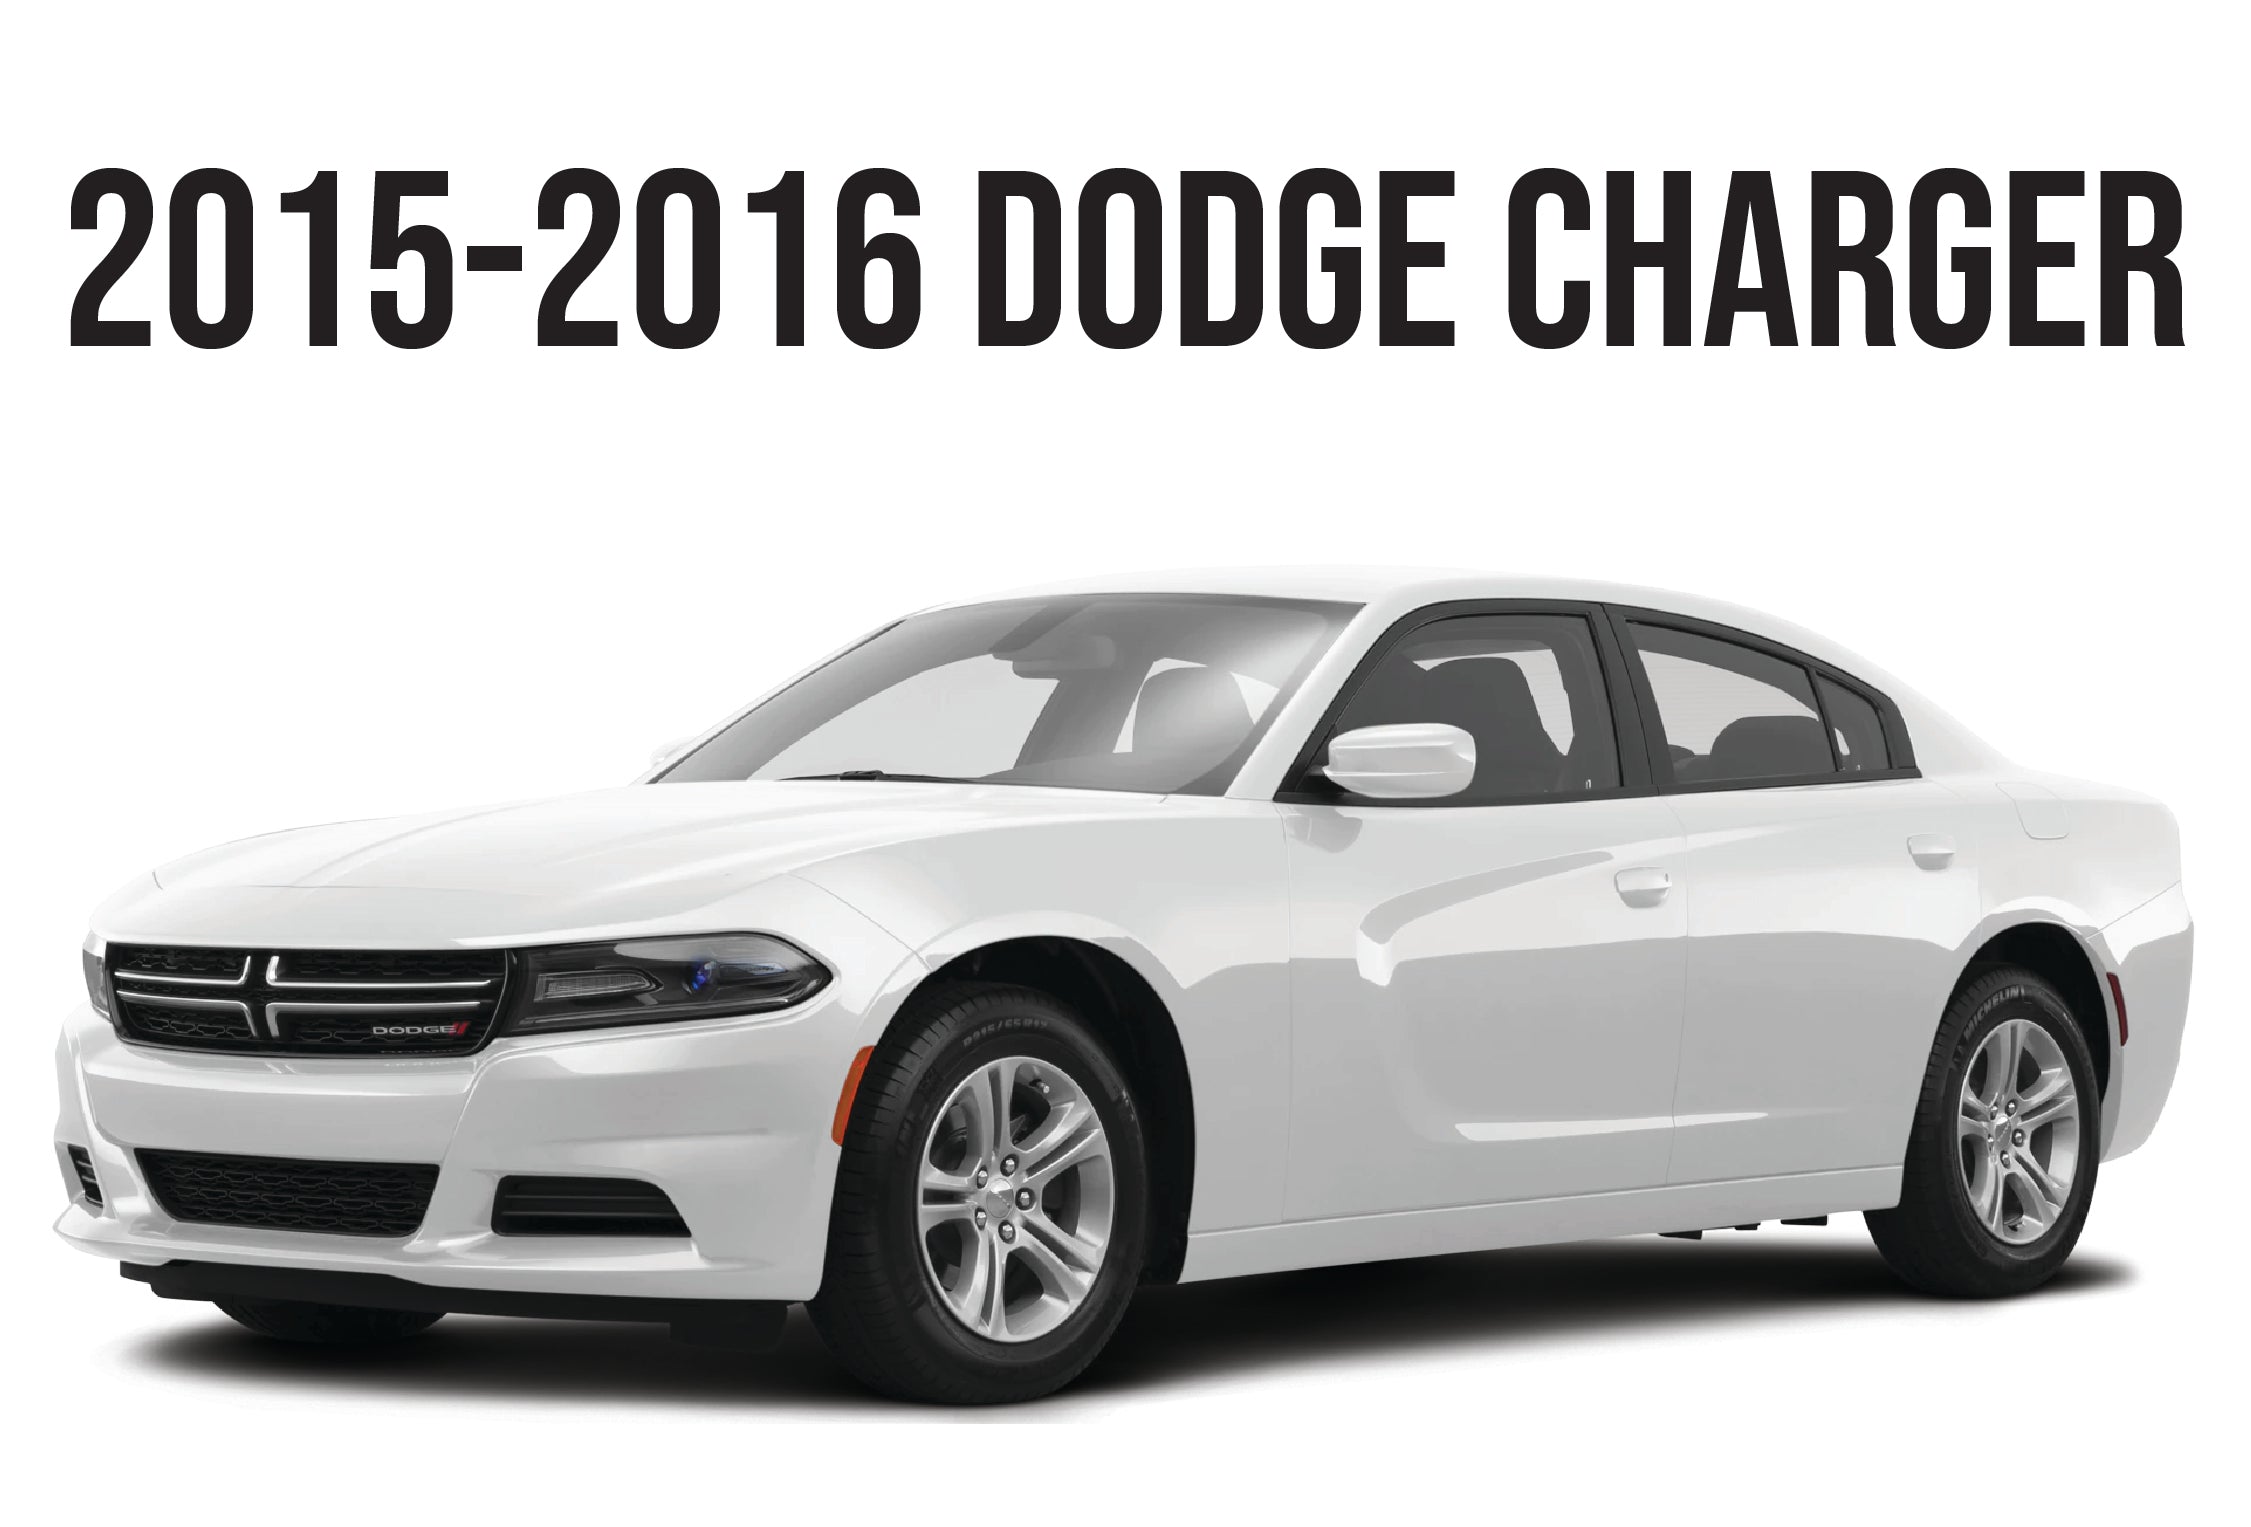 2015-2016 DODGE CHARGER